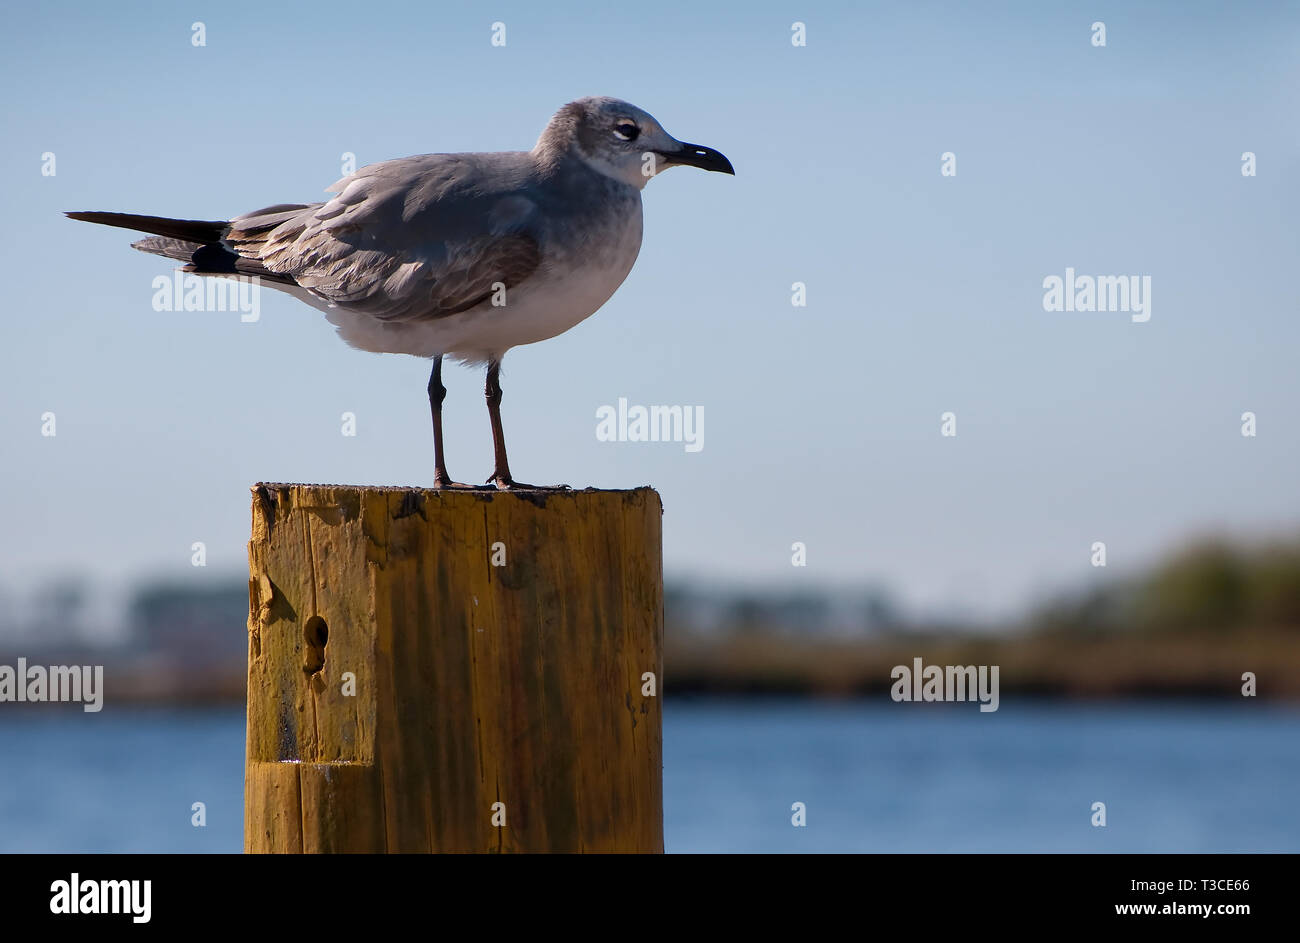 A laughing gull in non-breeding plumage perches on a piling at the old state docks in Bayou La Batre, Alabama, Nov. 17, 2010. Stock Photo